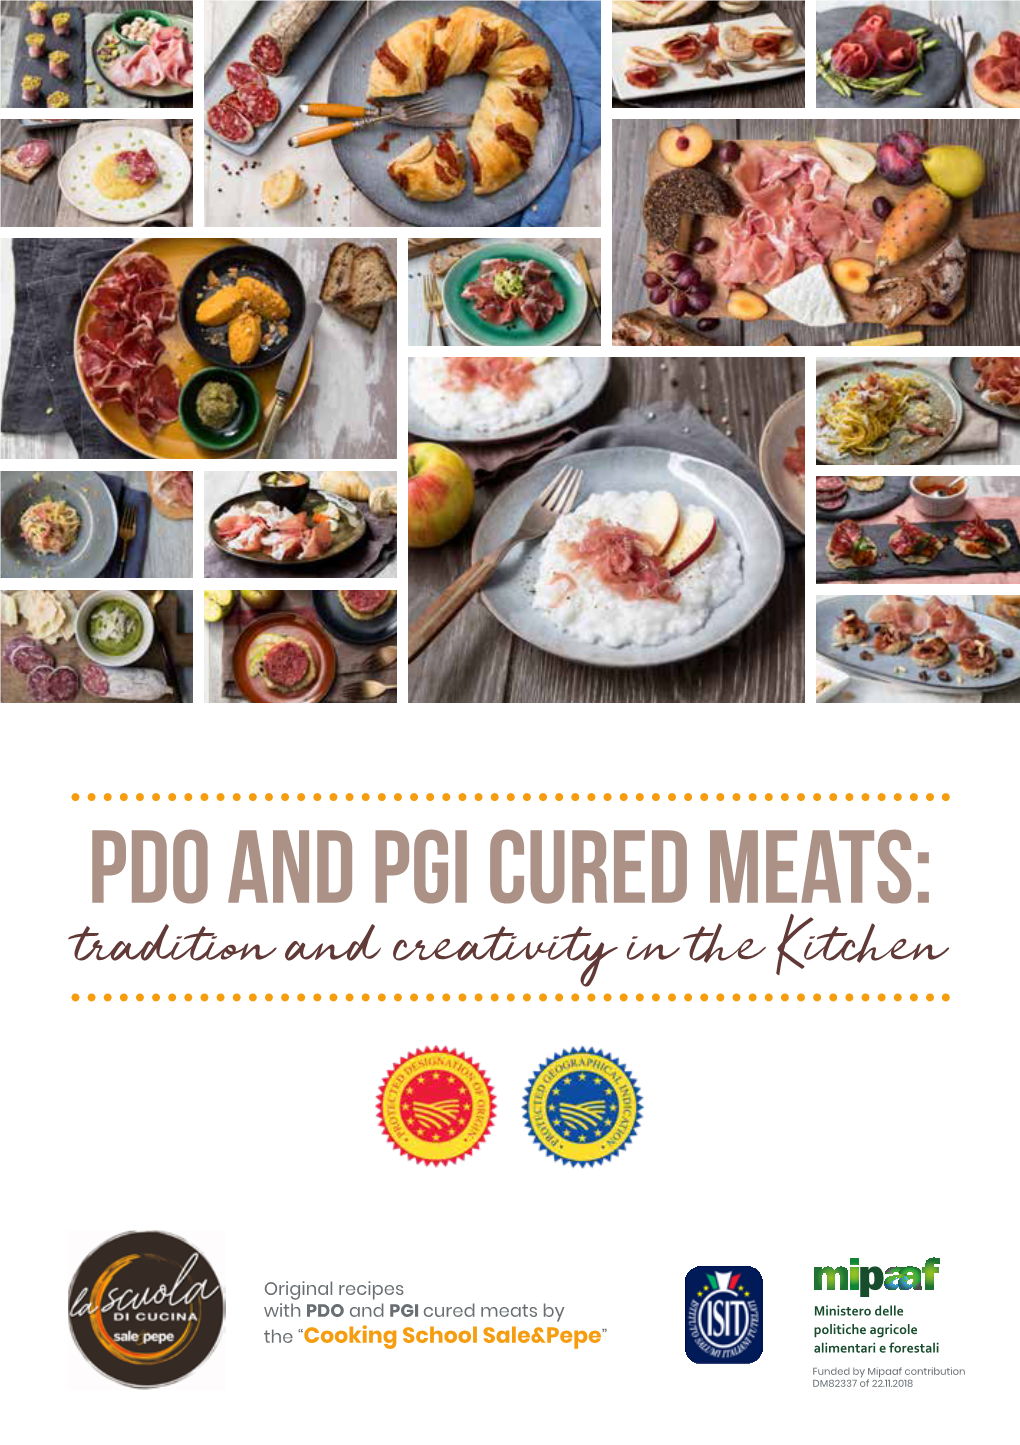 PDO and PGI Cured Meats: Tradition and Creativity in the Kitchen